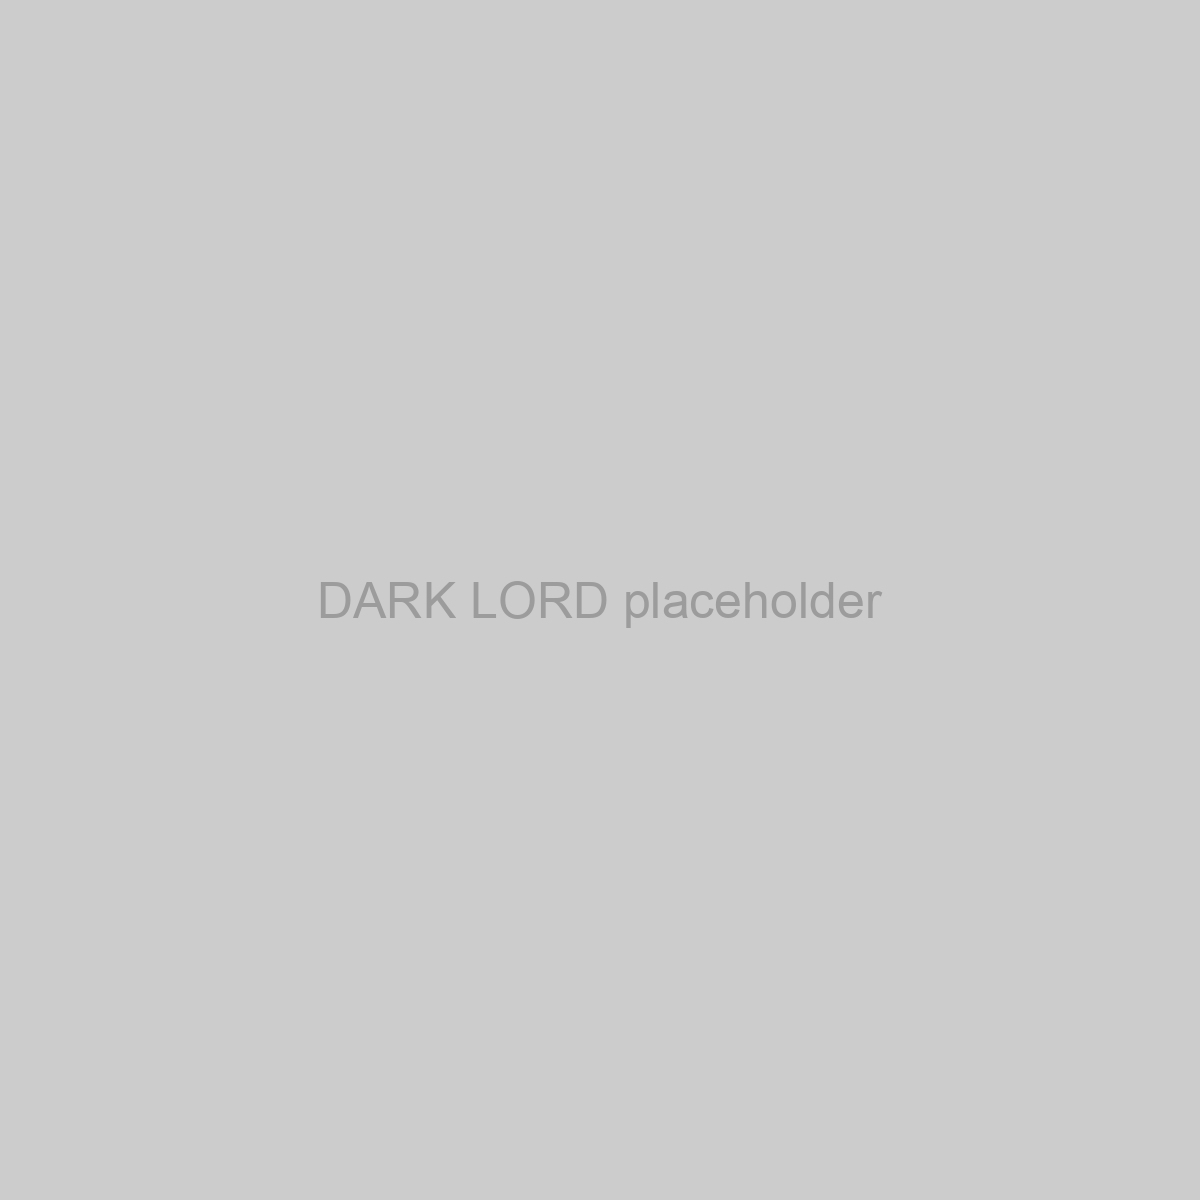 DARK LORD Placeholder Image